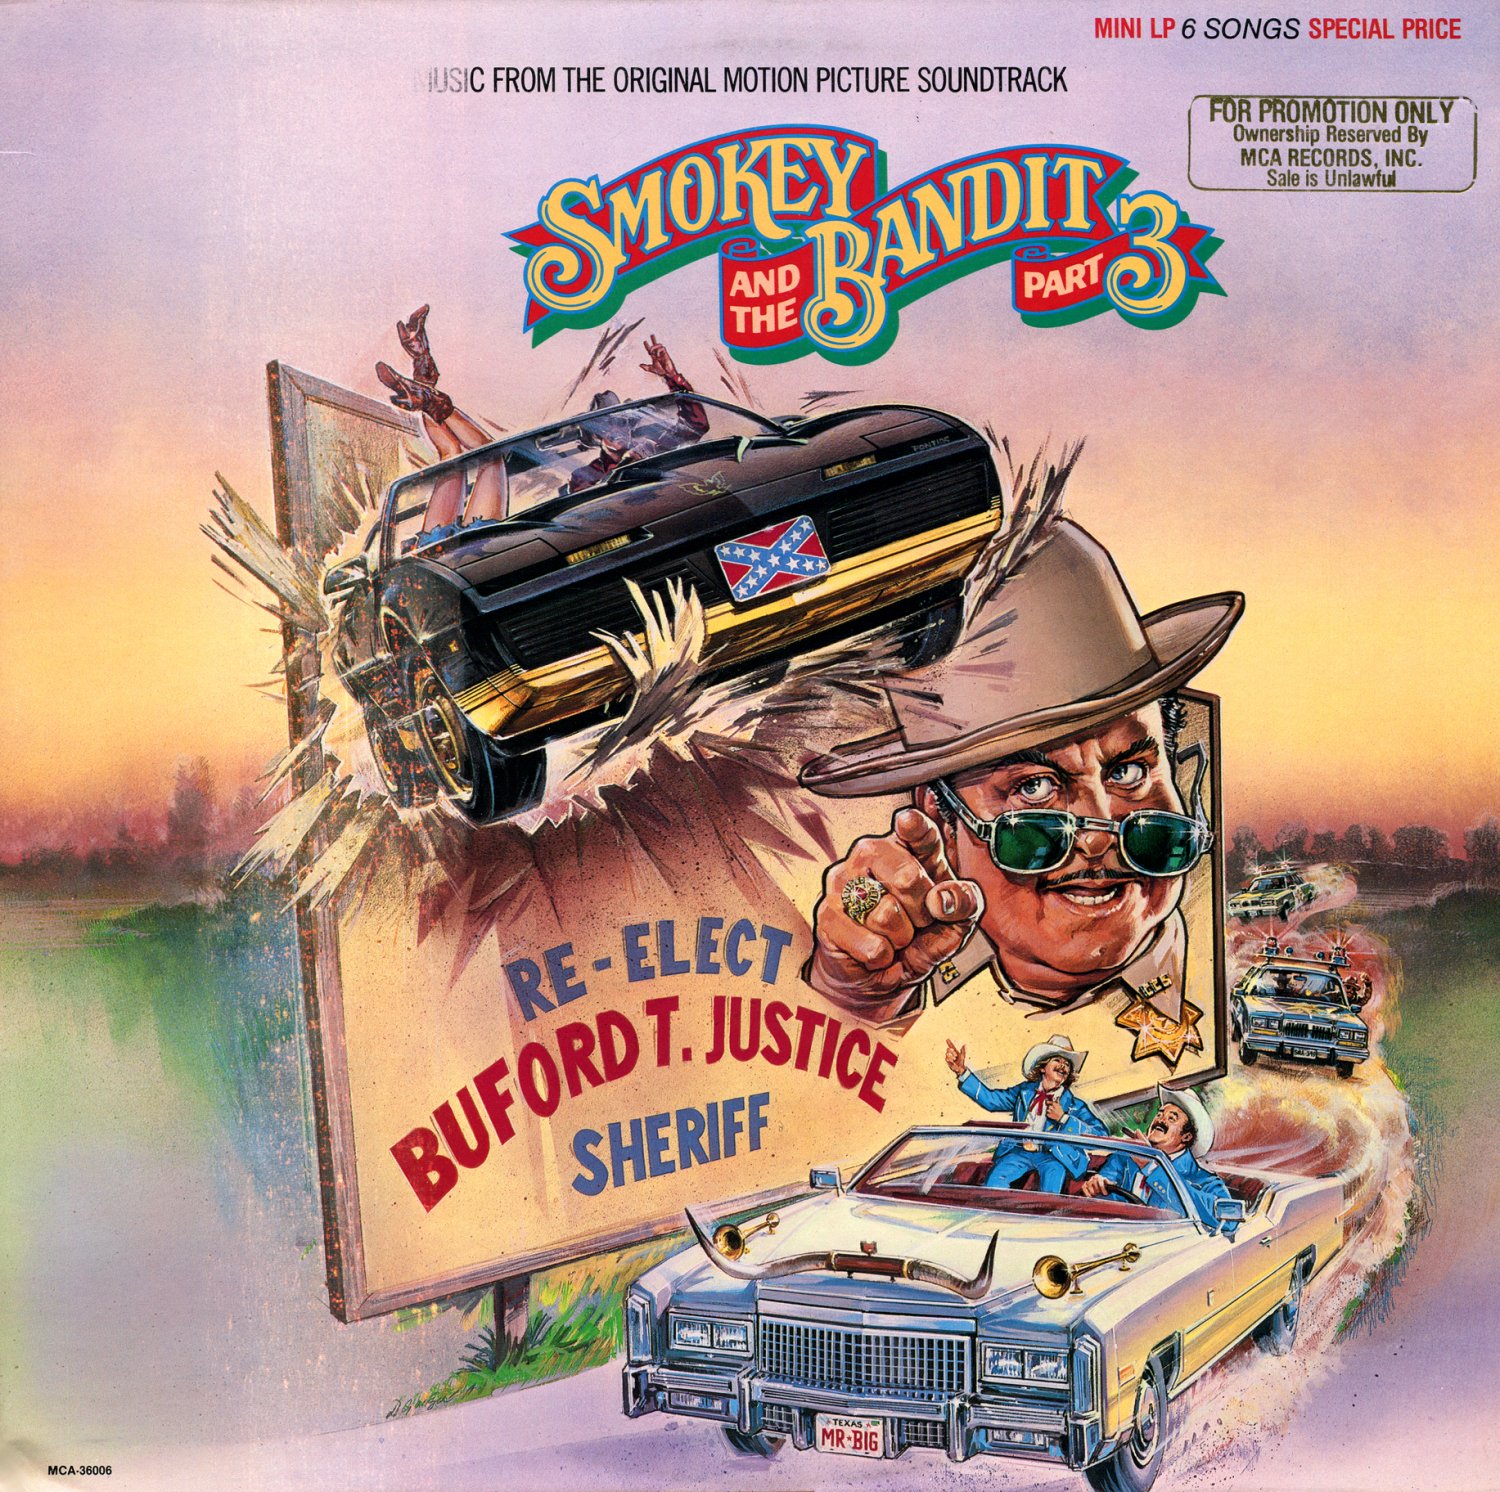 Smokey And The Bandit Part 3 - Original Soundtrack, Larry Cansler OST LP/CD...